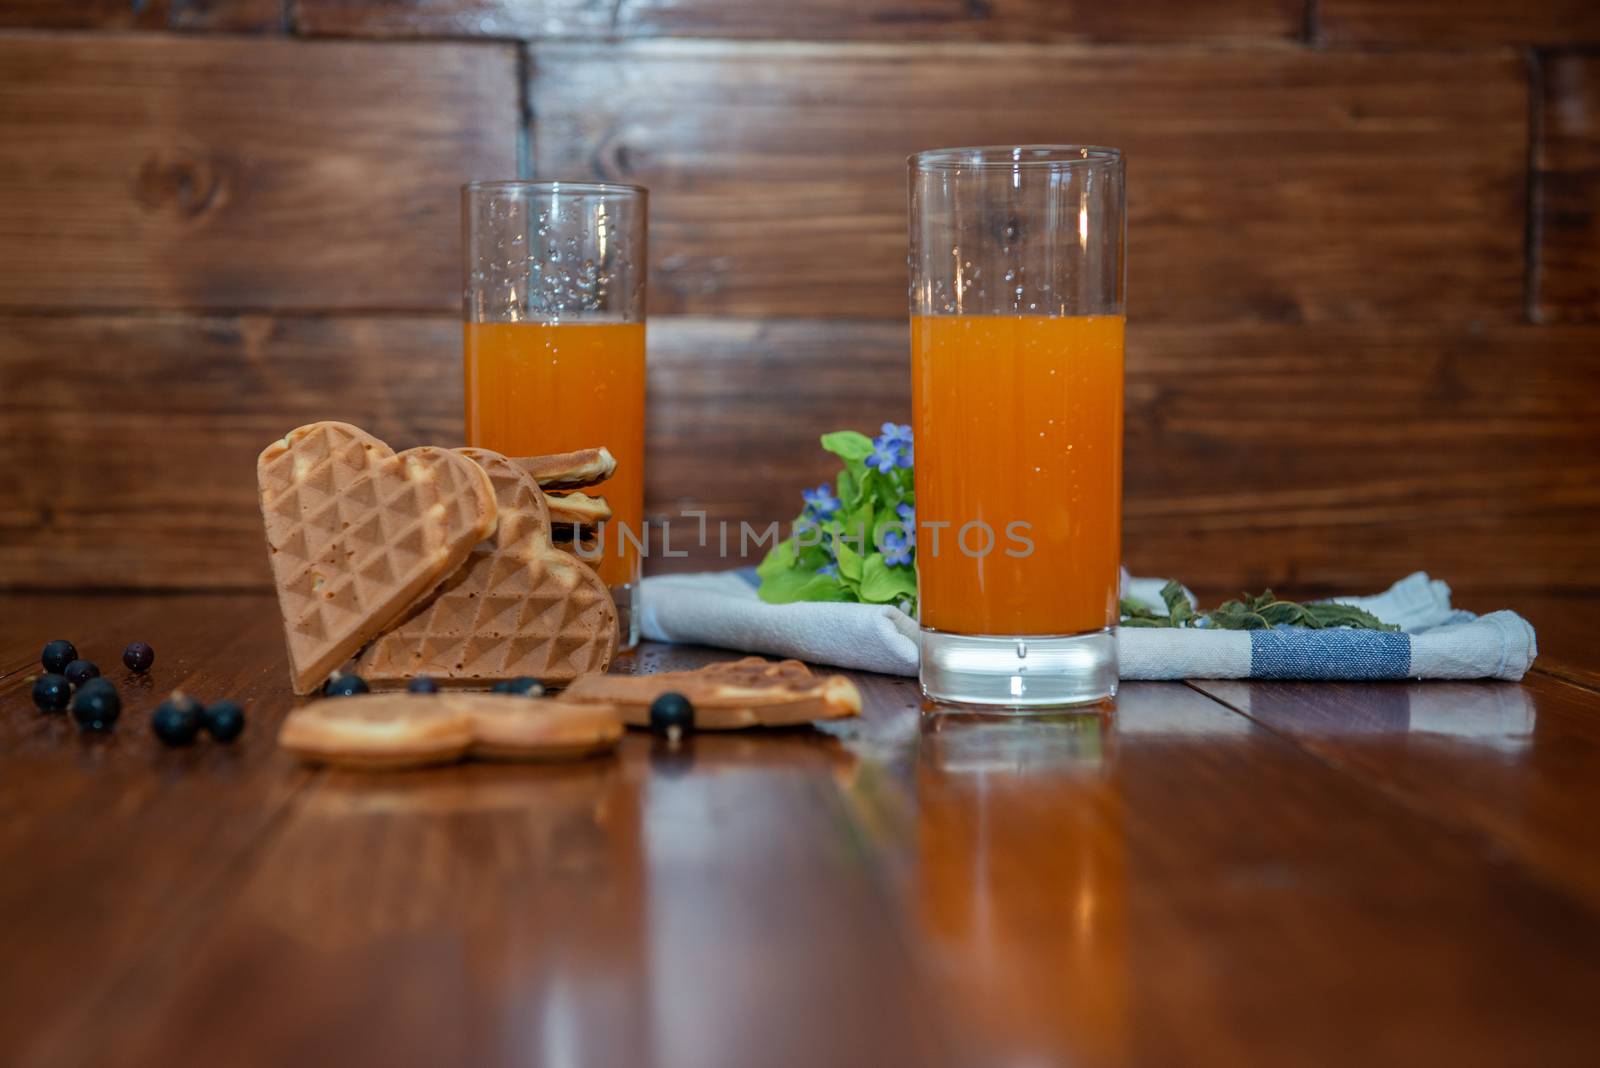 breakfast for two. freshly squeezed juice and wafers by marynkin